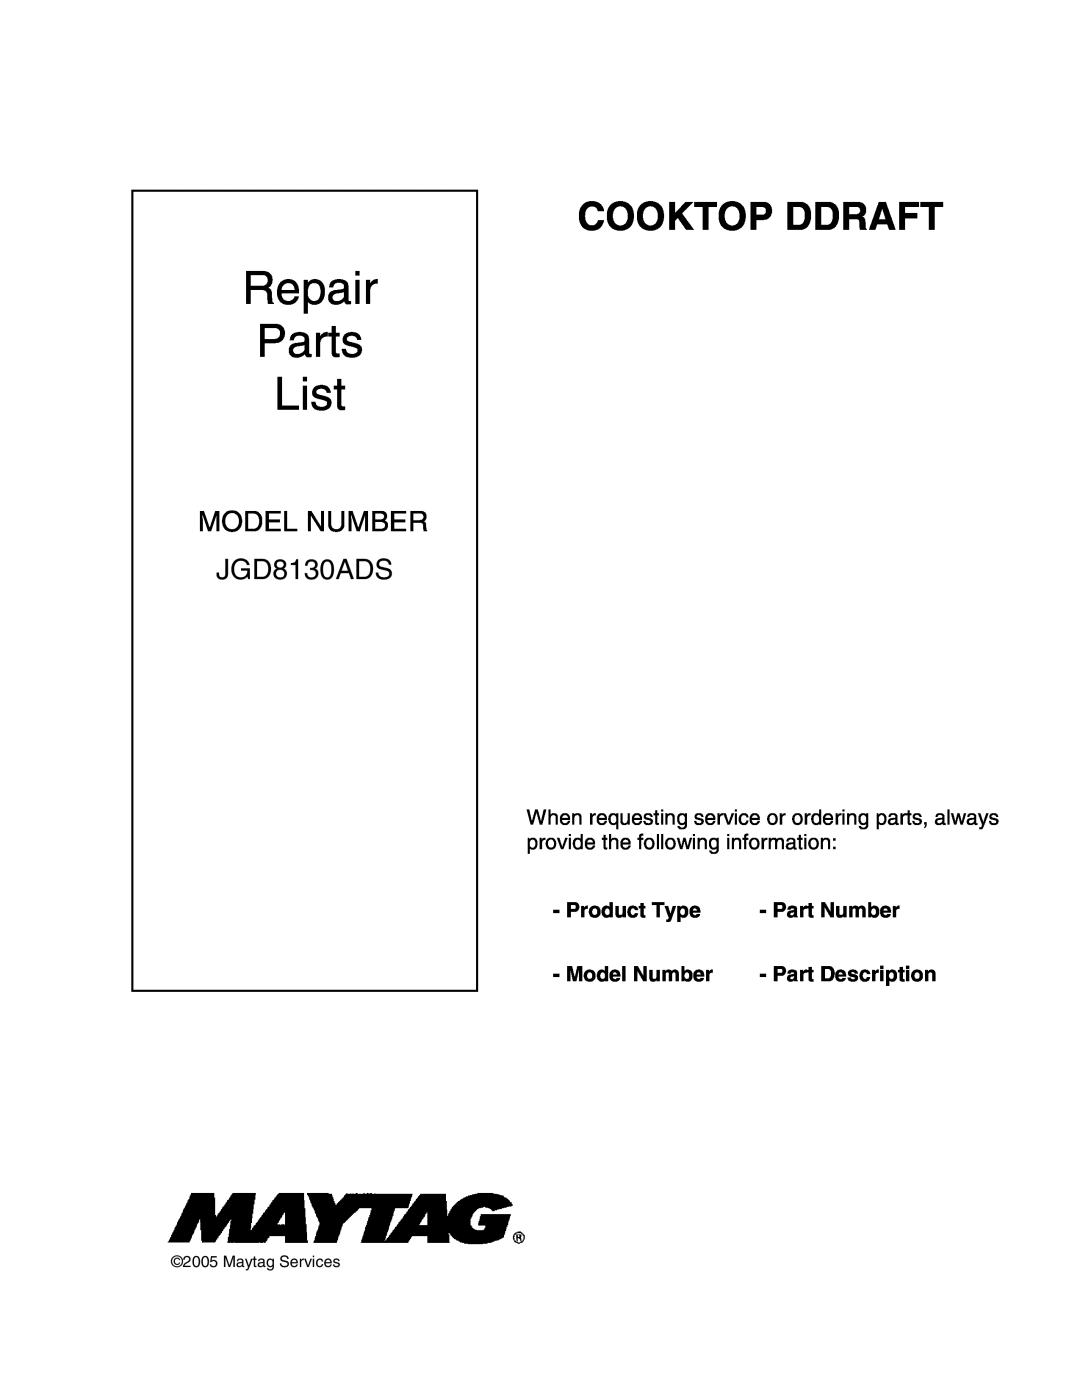 Maytag JGD8130ADS manual Product Type, Part Number, Model Number, Part Description, Repair Parts List, Cooktop Ddraft 